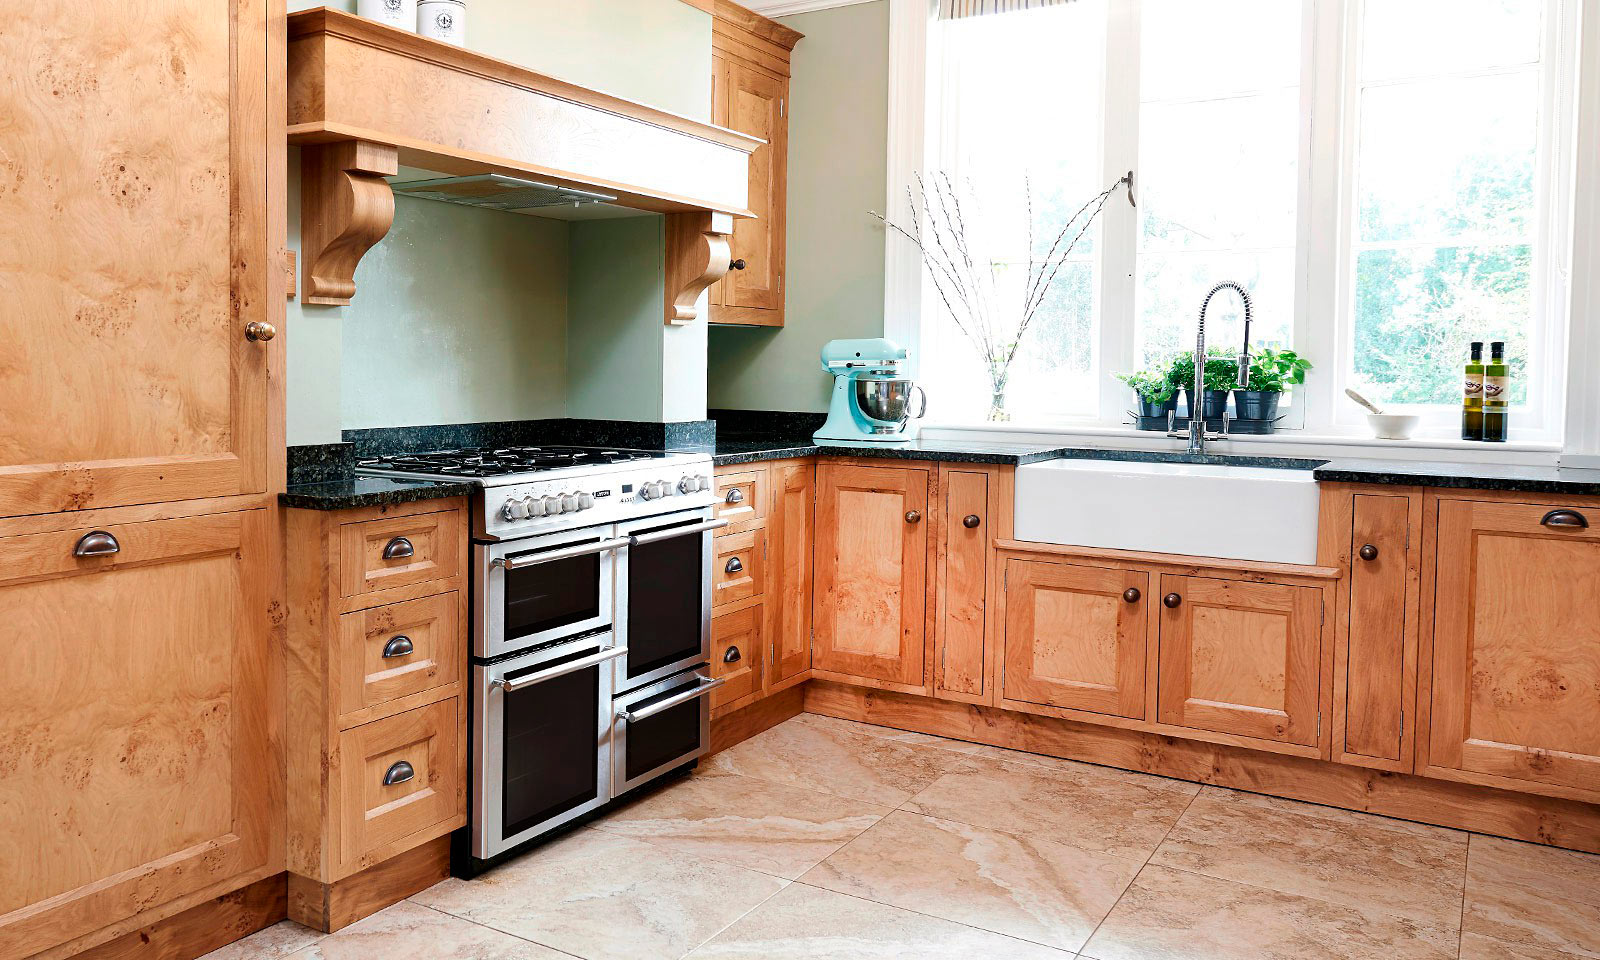 Pantiles. A classic handmade, hand-painted, Shaker style kitchen, installed in a grade II listed building. Built using solid European oak and finished in cluster oak veneer with granite worktops. Another hand-crafted kitchen manufactured by the skilled cabinet makers at Mounts Hill Woodcraft.